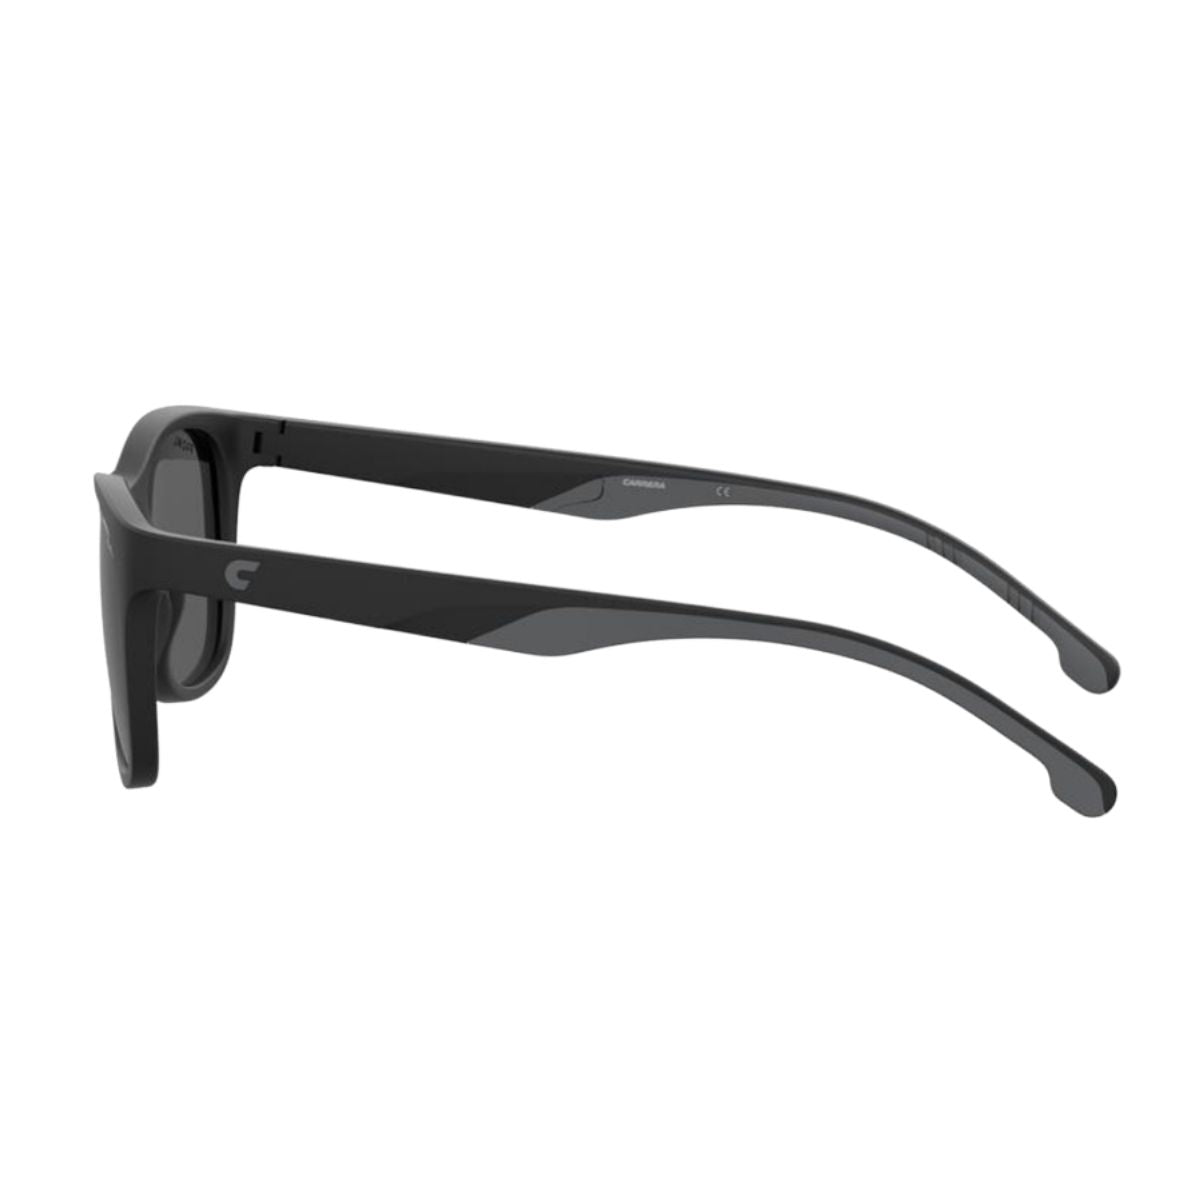 "Stylish Black Square Sunglasses For Both Mens And Womens At Optorium"